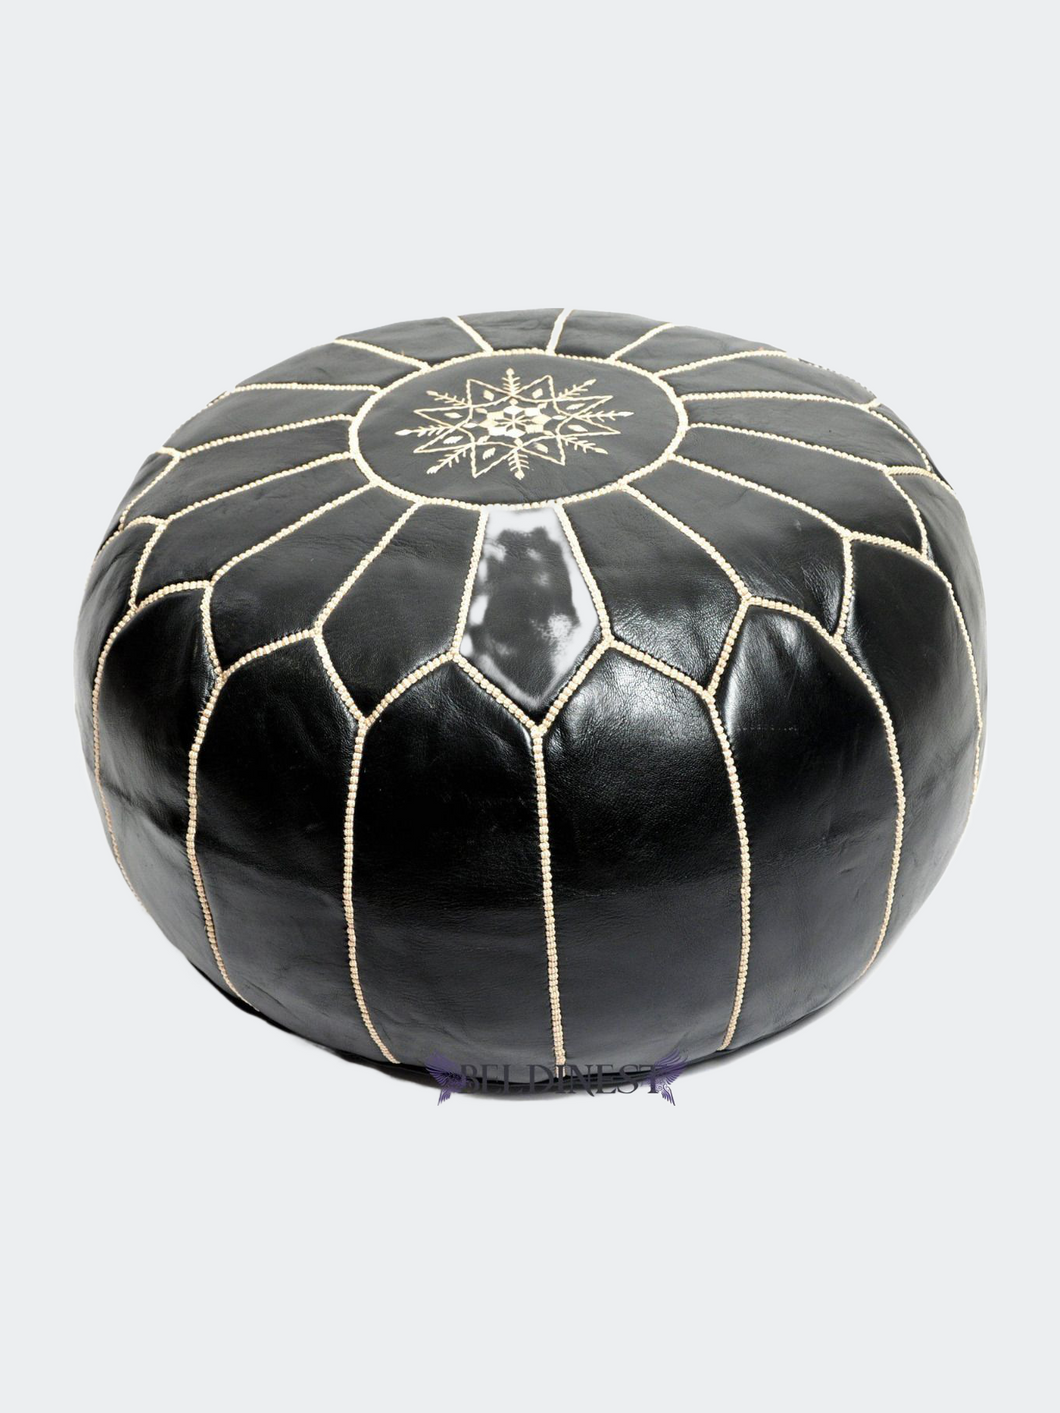 Embroidered Leather Pouf - Black With White Stitching